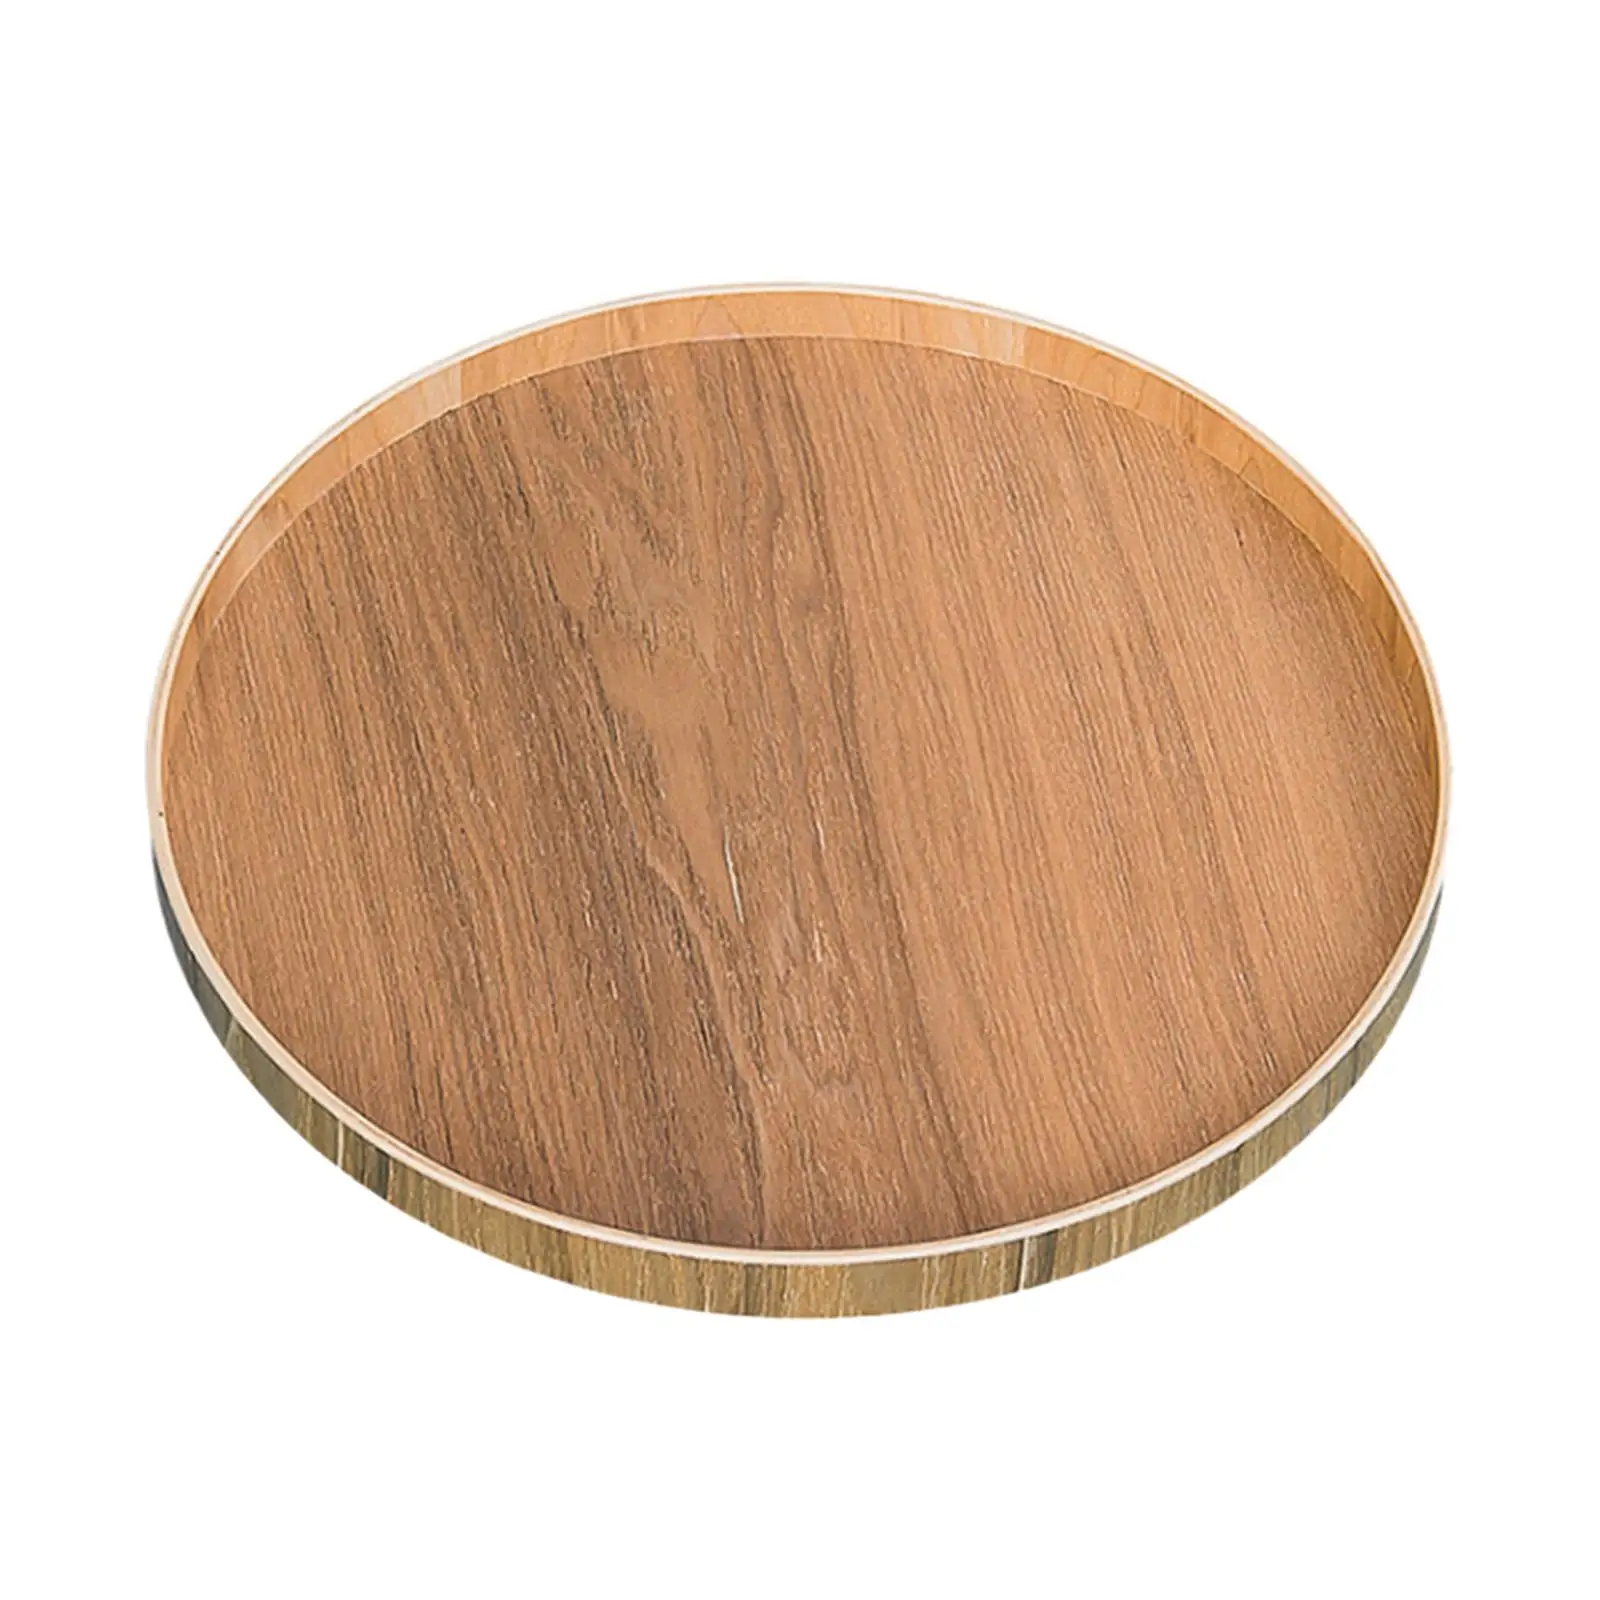 Wooden Serving Plate Breakfast Tray Dessert Tray Party Serving Platter for Kitchen Dining Table Home Bathroom Table Centerpiece